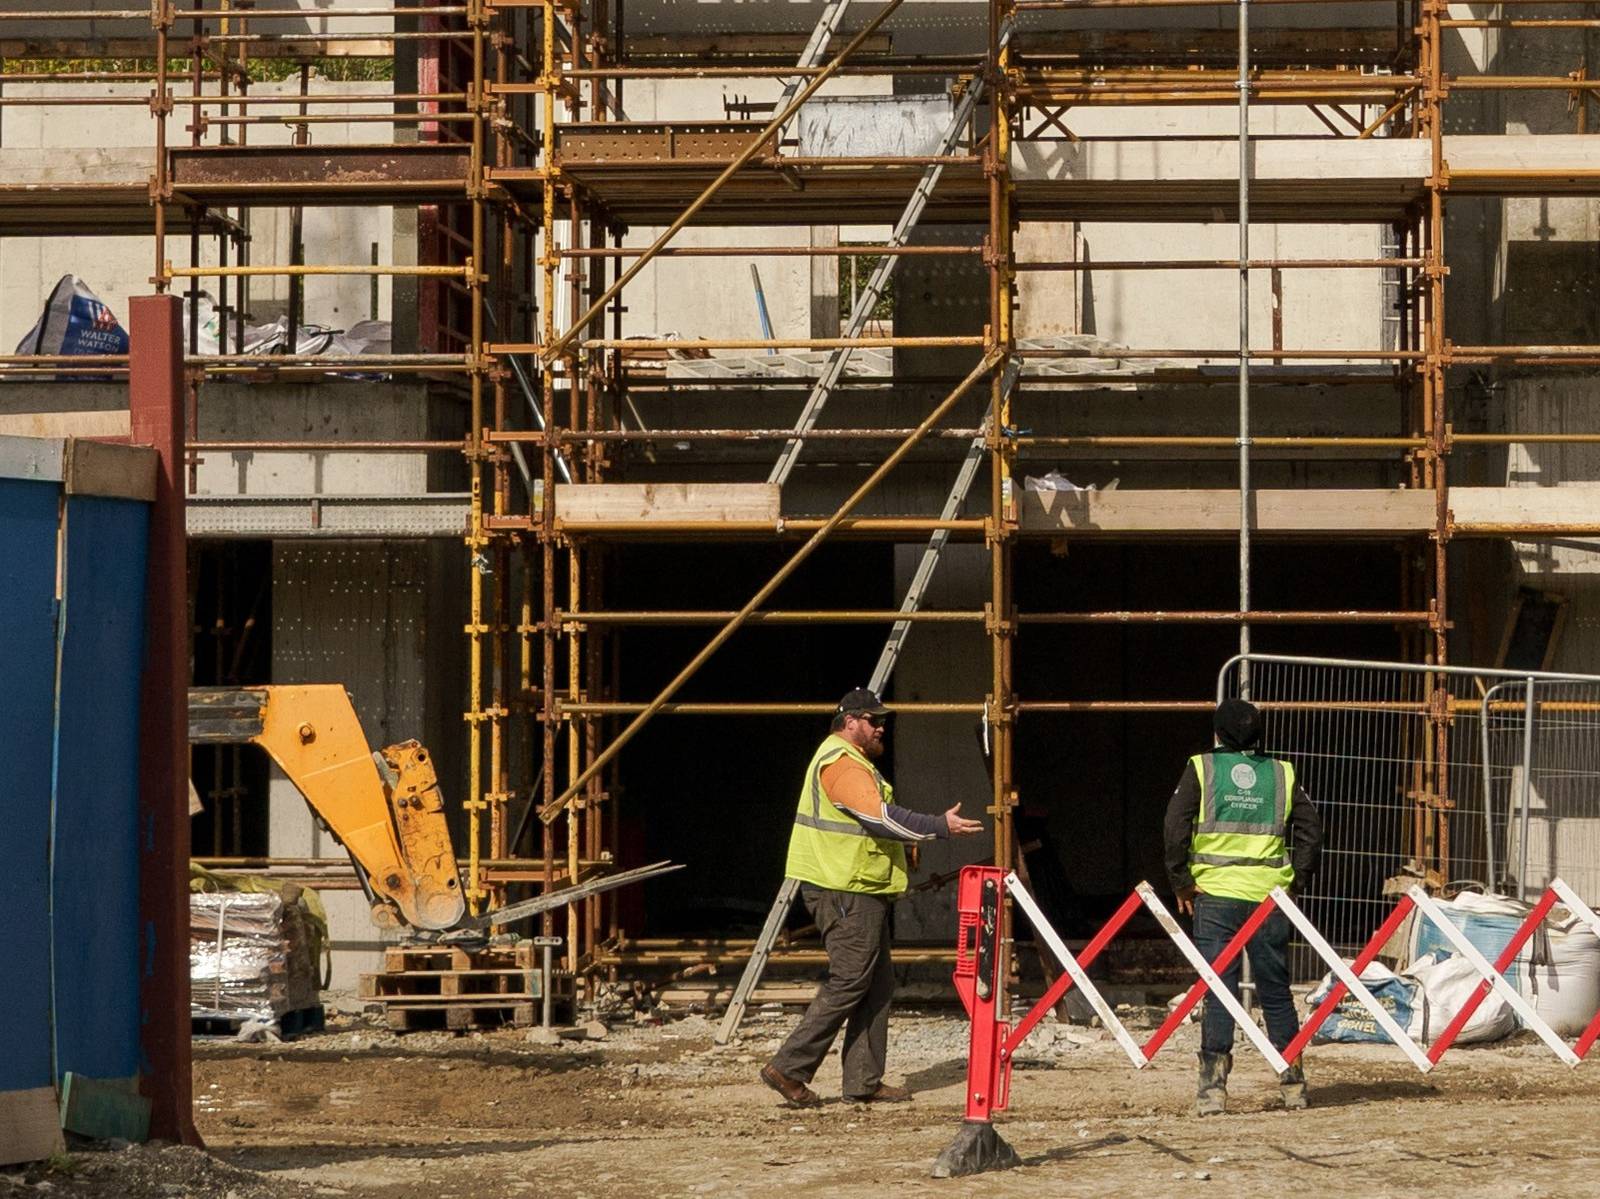 Workers monitor a crane lifting materials at a construction site in the Sandyford district of Dublin, Ireland, on Tuesday, May 11, 2021. The mass purchase of affordable houses  on the market for about 400,000 euros ($490,000)  set off a public firestorm and highlights the growing tension over the squeeze in urban housing and the role of large investors. Photographer: Paulo Nunes dos Santos/Bloomberg